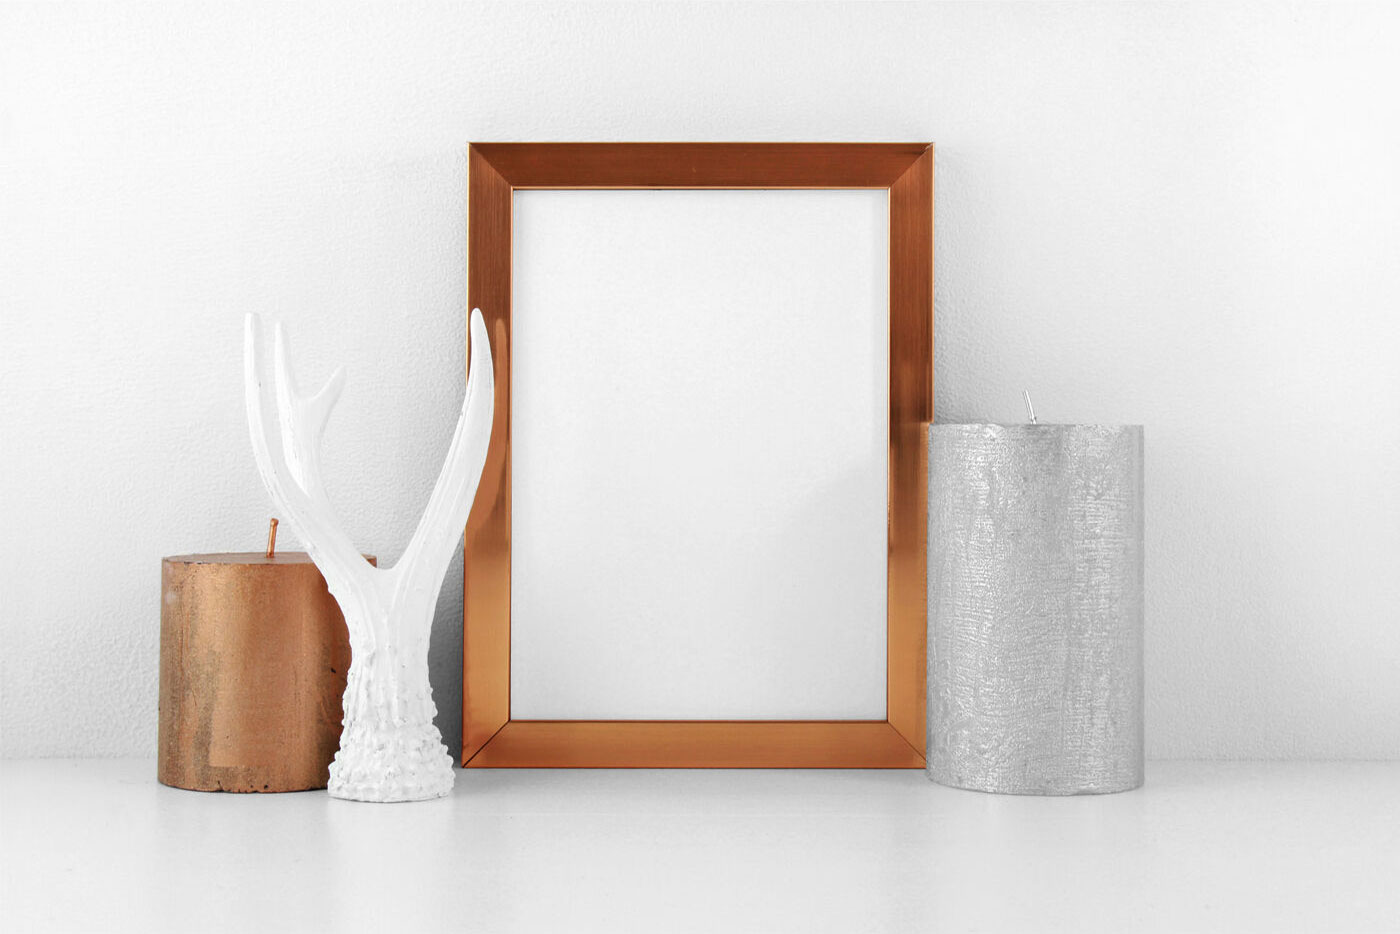 Gold Frame Mockup in Decorative Setting FREE PSD